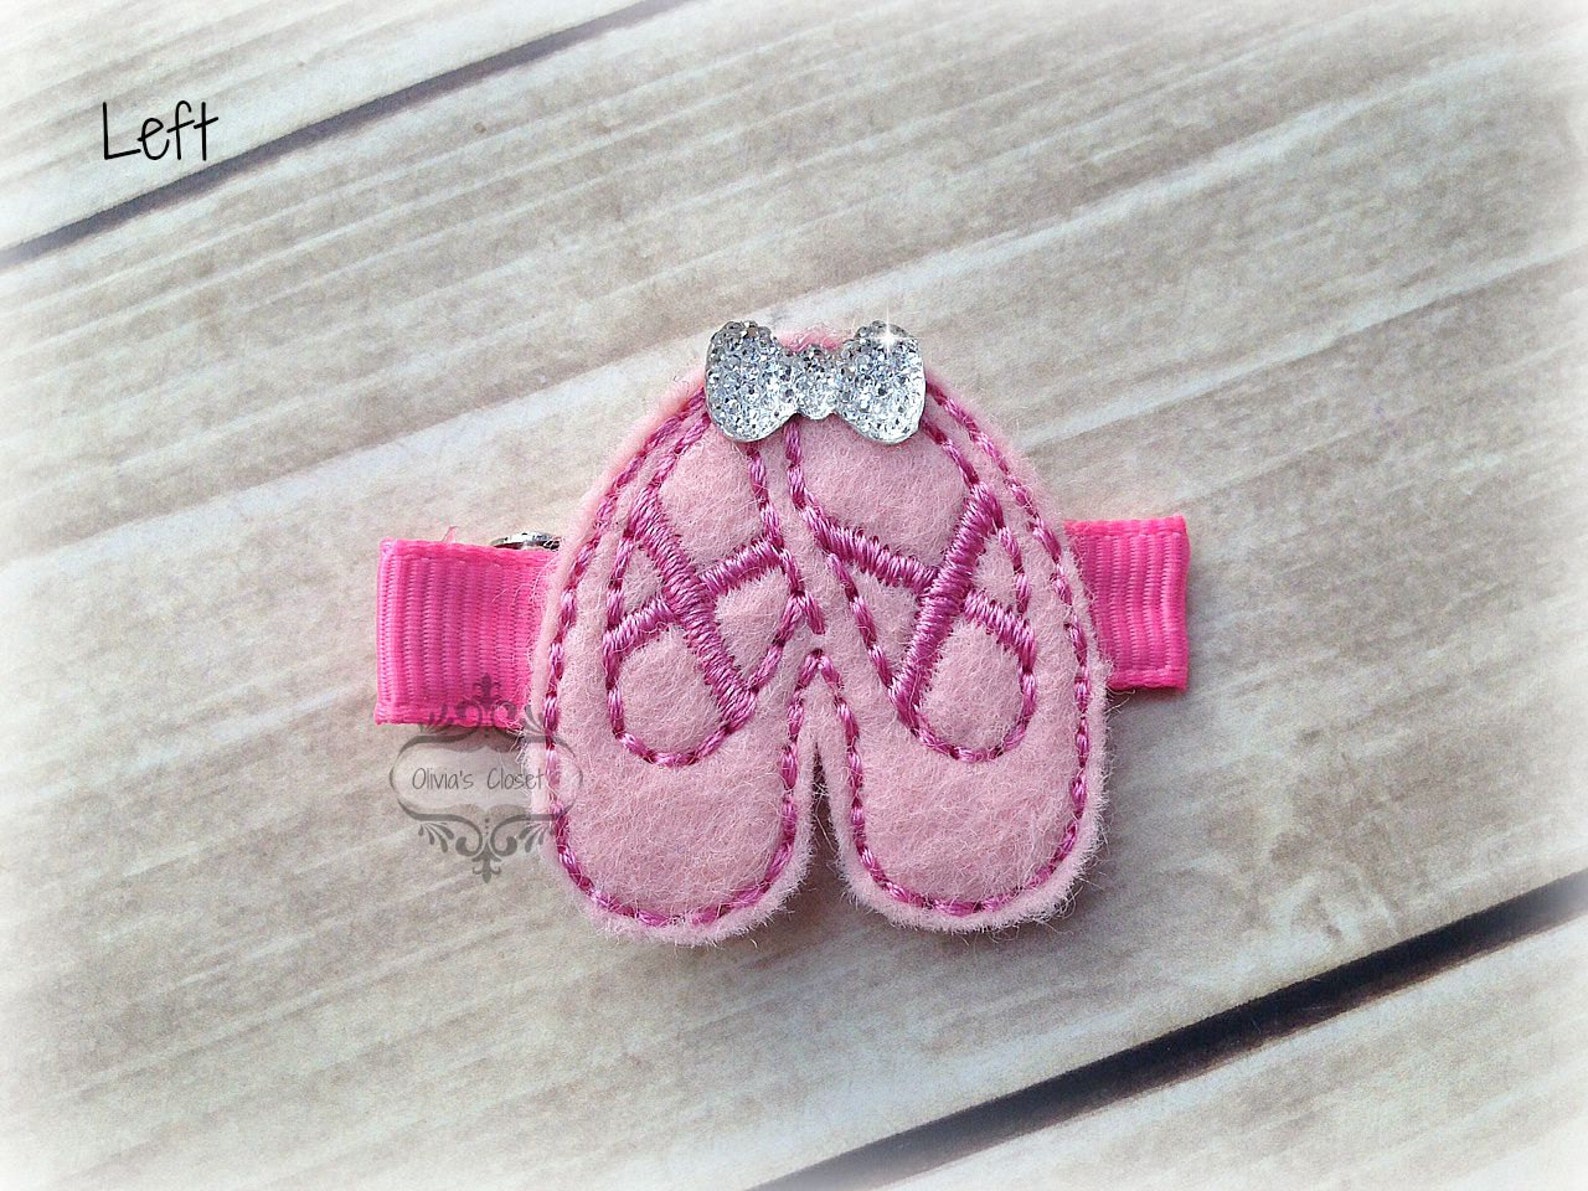 ballet hair clip shoes dancing performance embroidered felt hair clippie tiny rhinestone bows. pick one or two. pick left side o